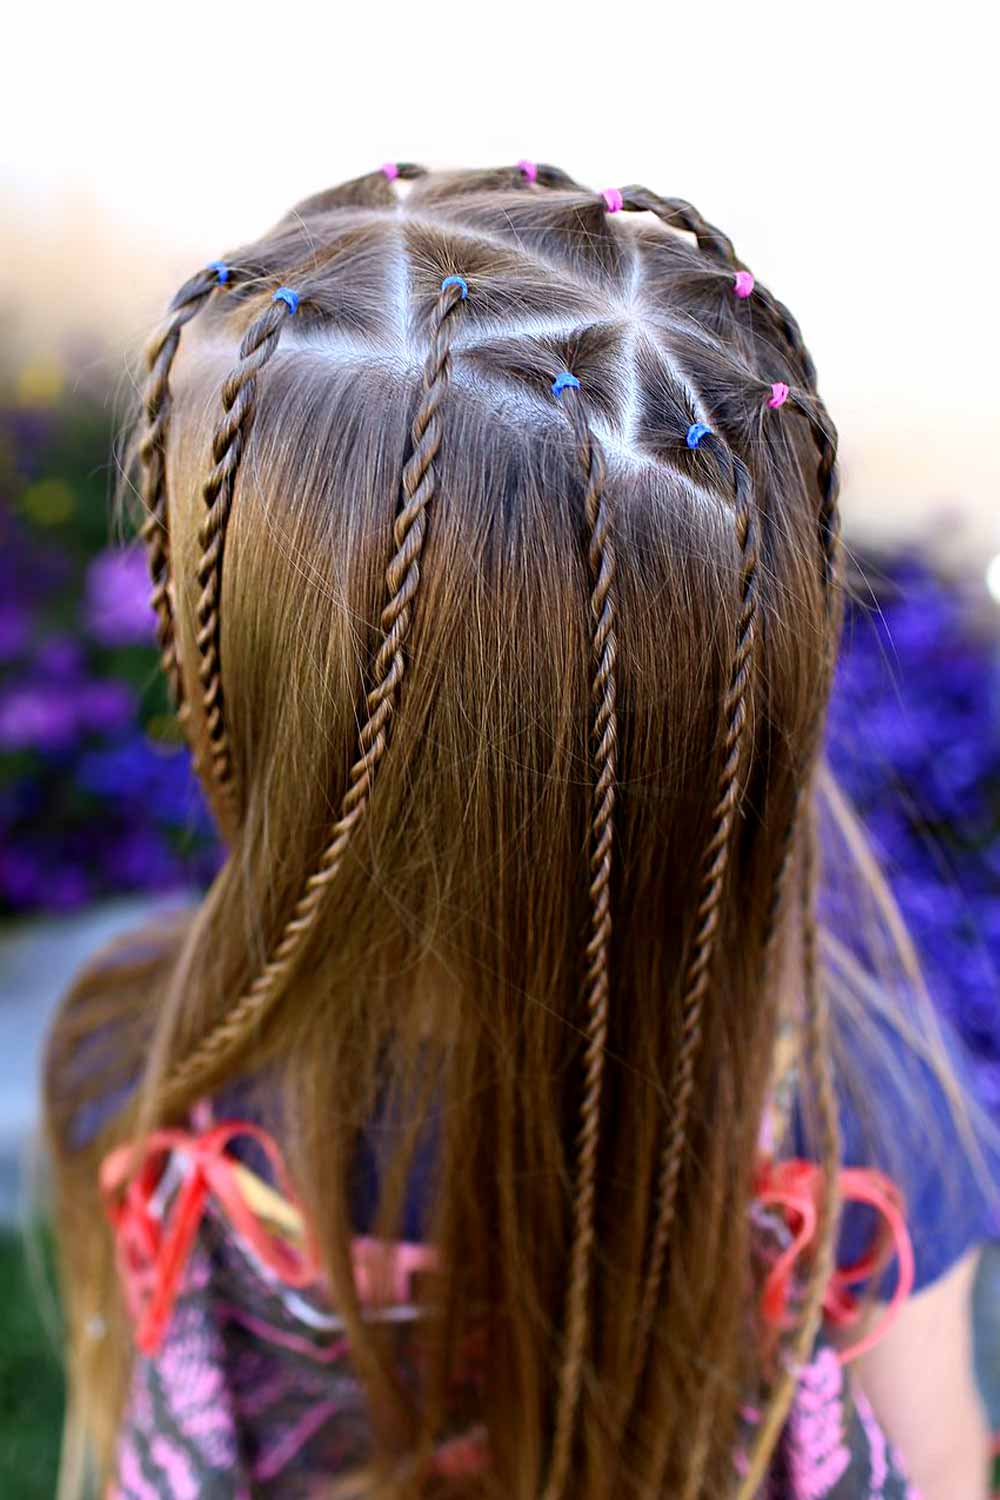 Rubber Band Hairstyles with Twist Braids for Girls Long Hair #rubberbandhairstyles #naturalhairstyles #kidshairstyles